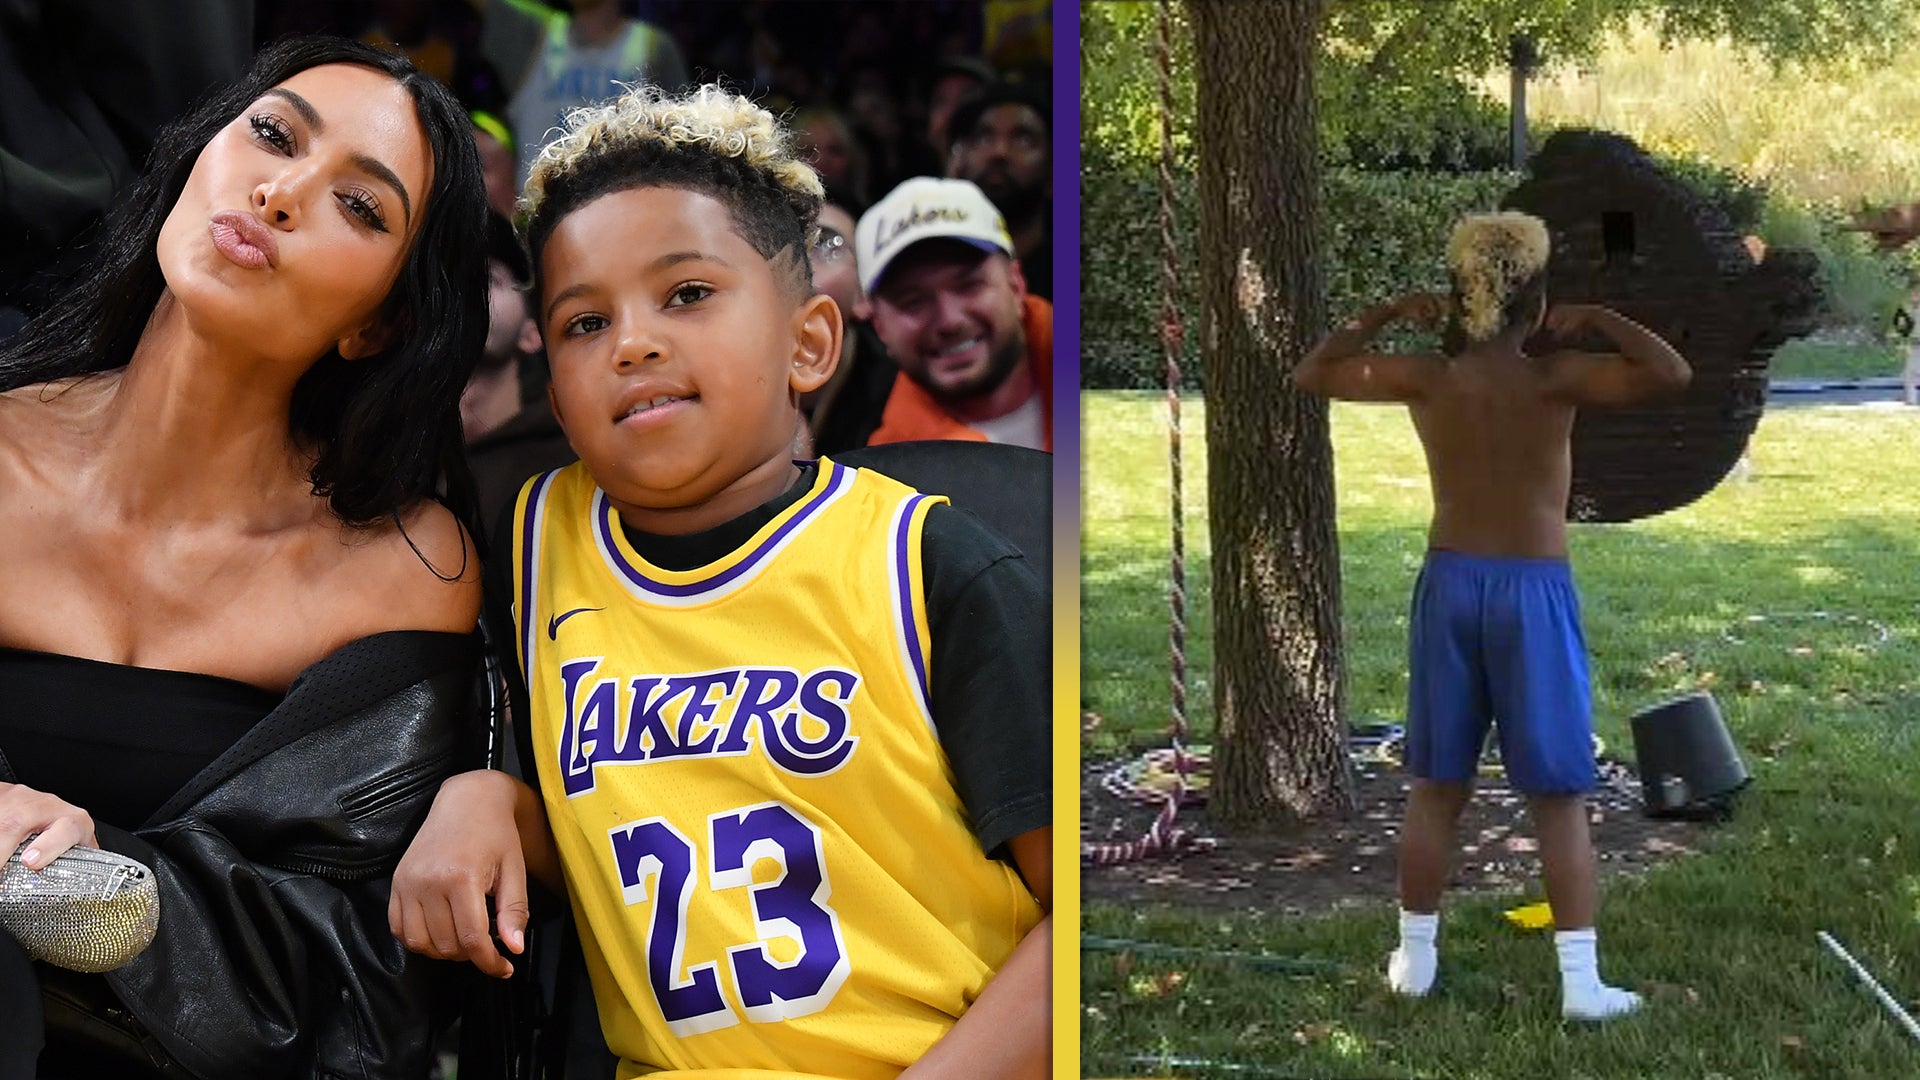 Kim Kardashian’s Son Saint Gets Competitive and 'Flexes on Them' at Psalm’s Birthday Party